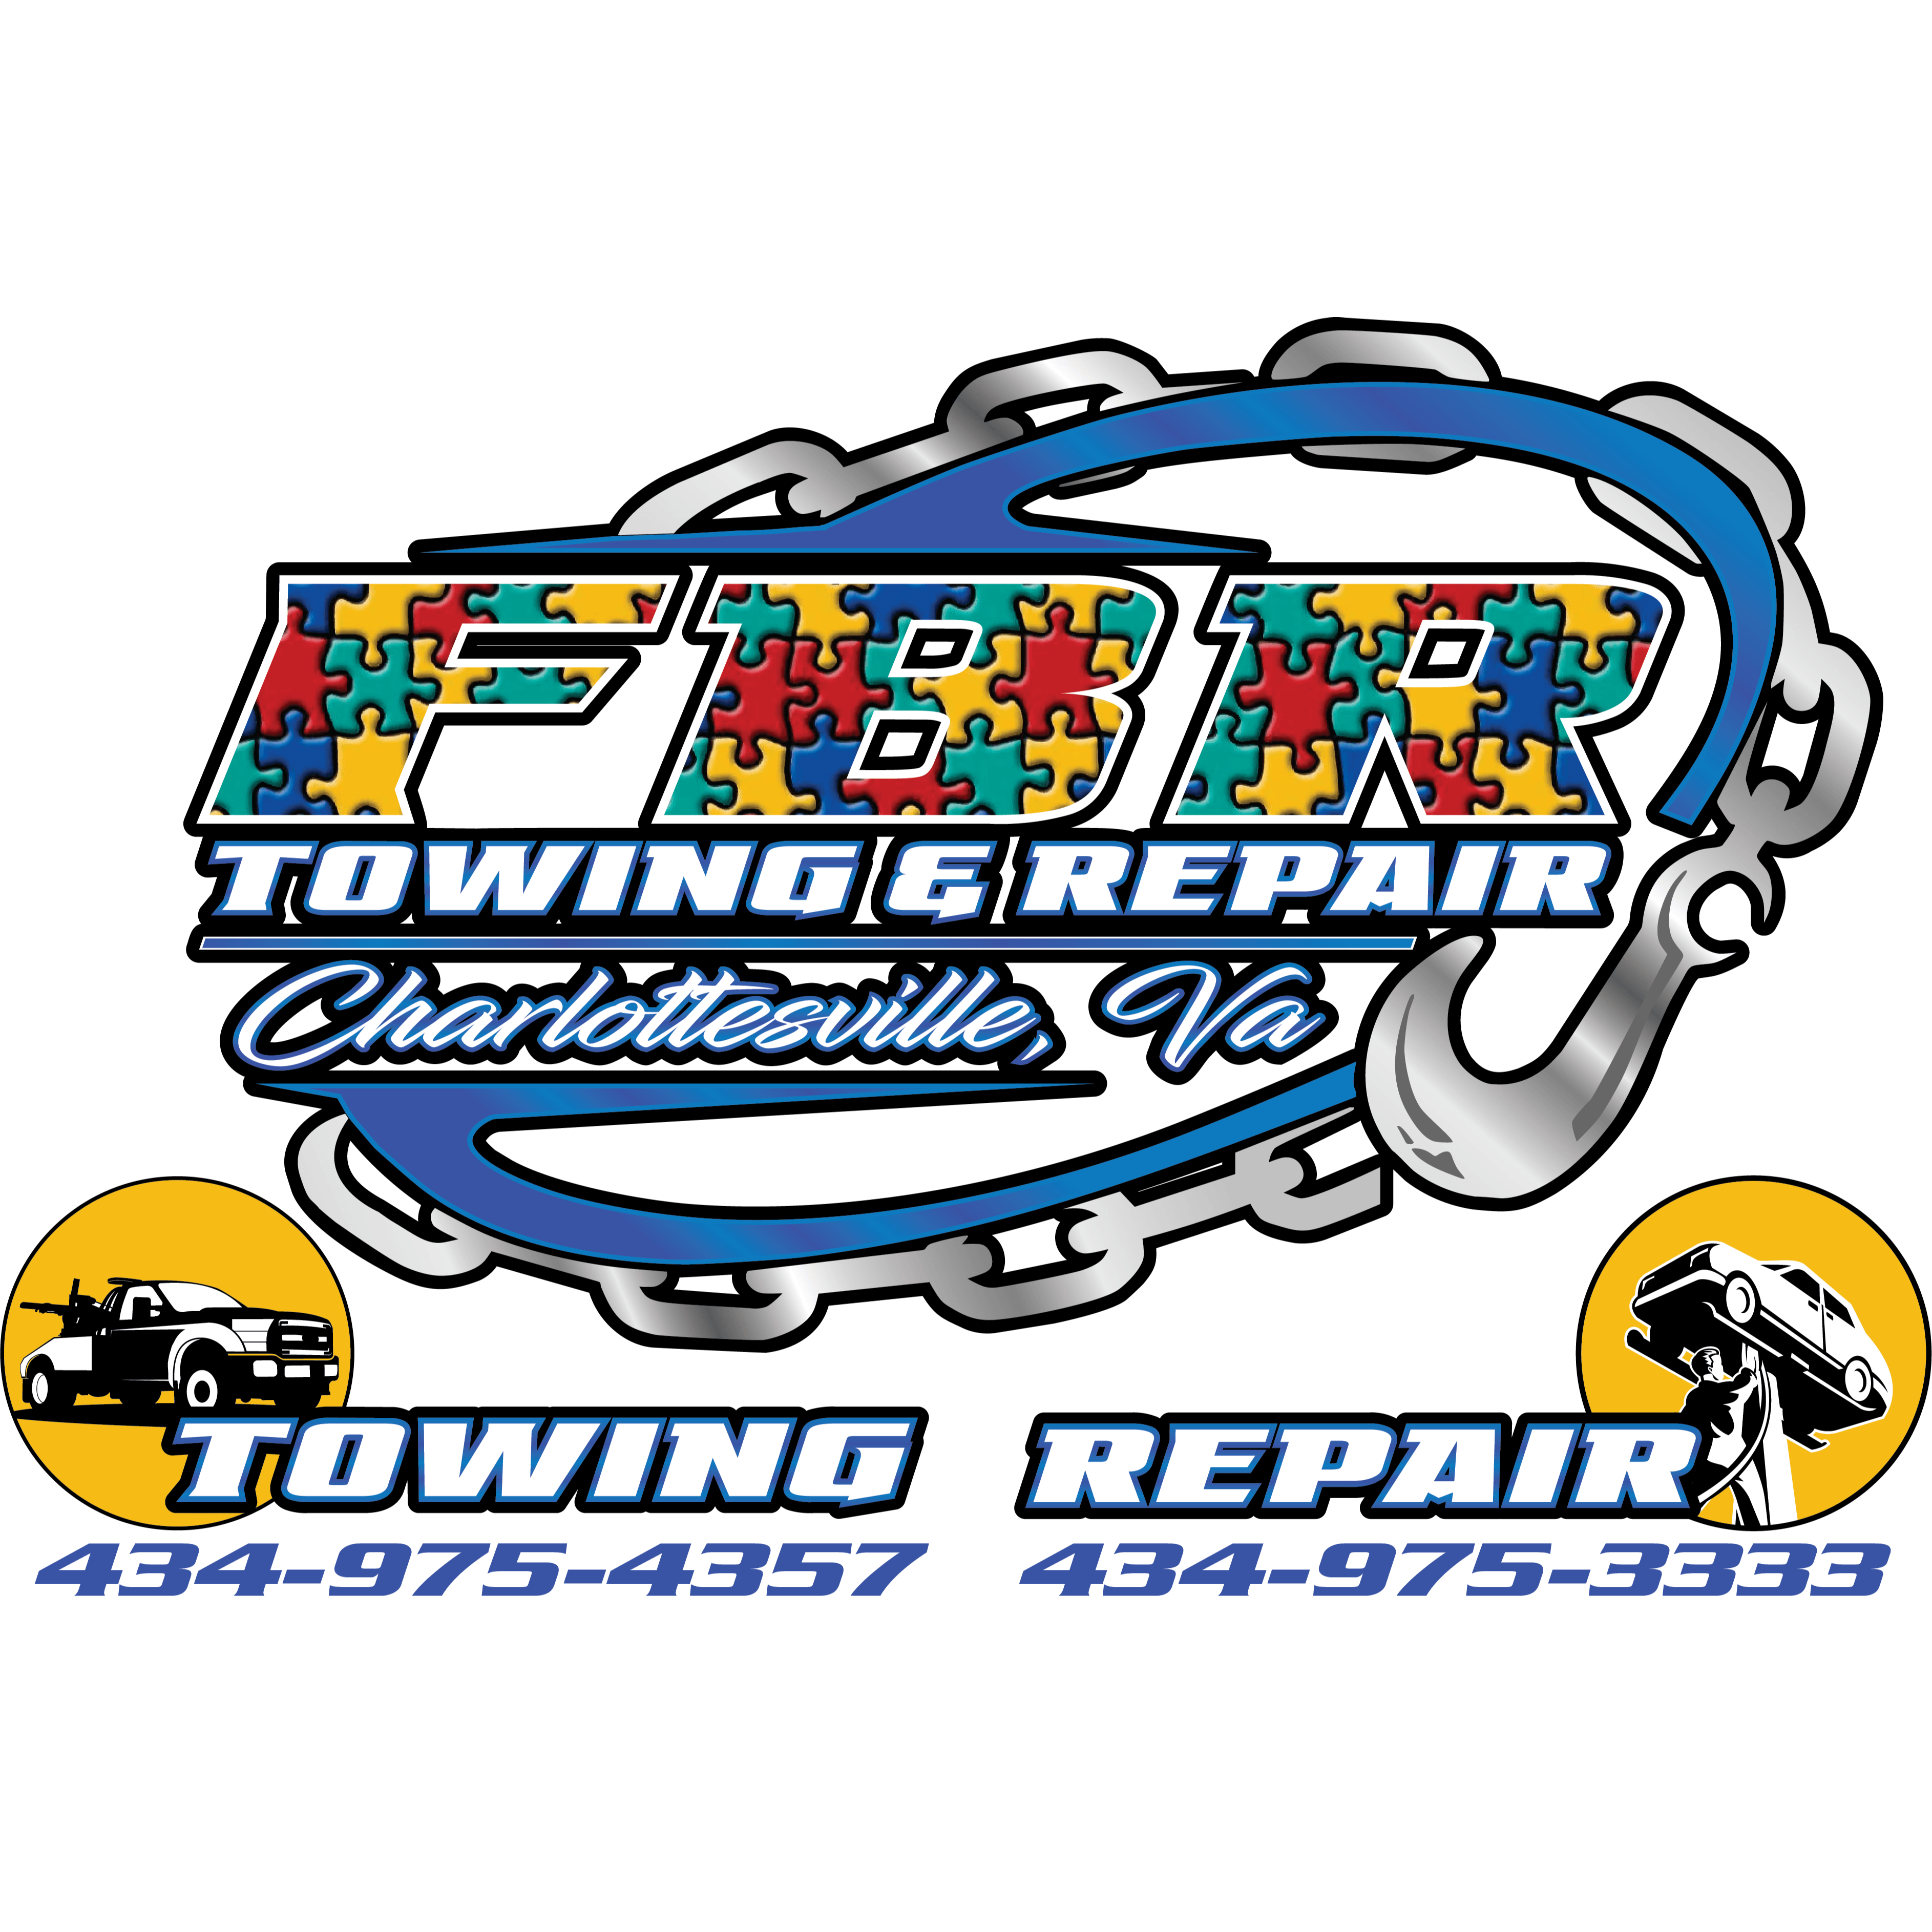 FBR Towing & Recovering - Charlottesville, VA 22903 - (434)975-4357 | ShowMeLocal.com